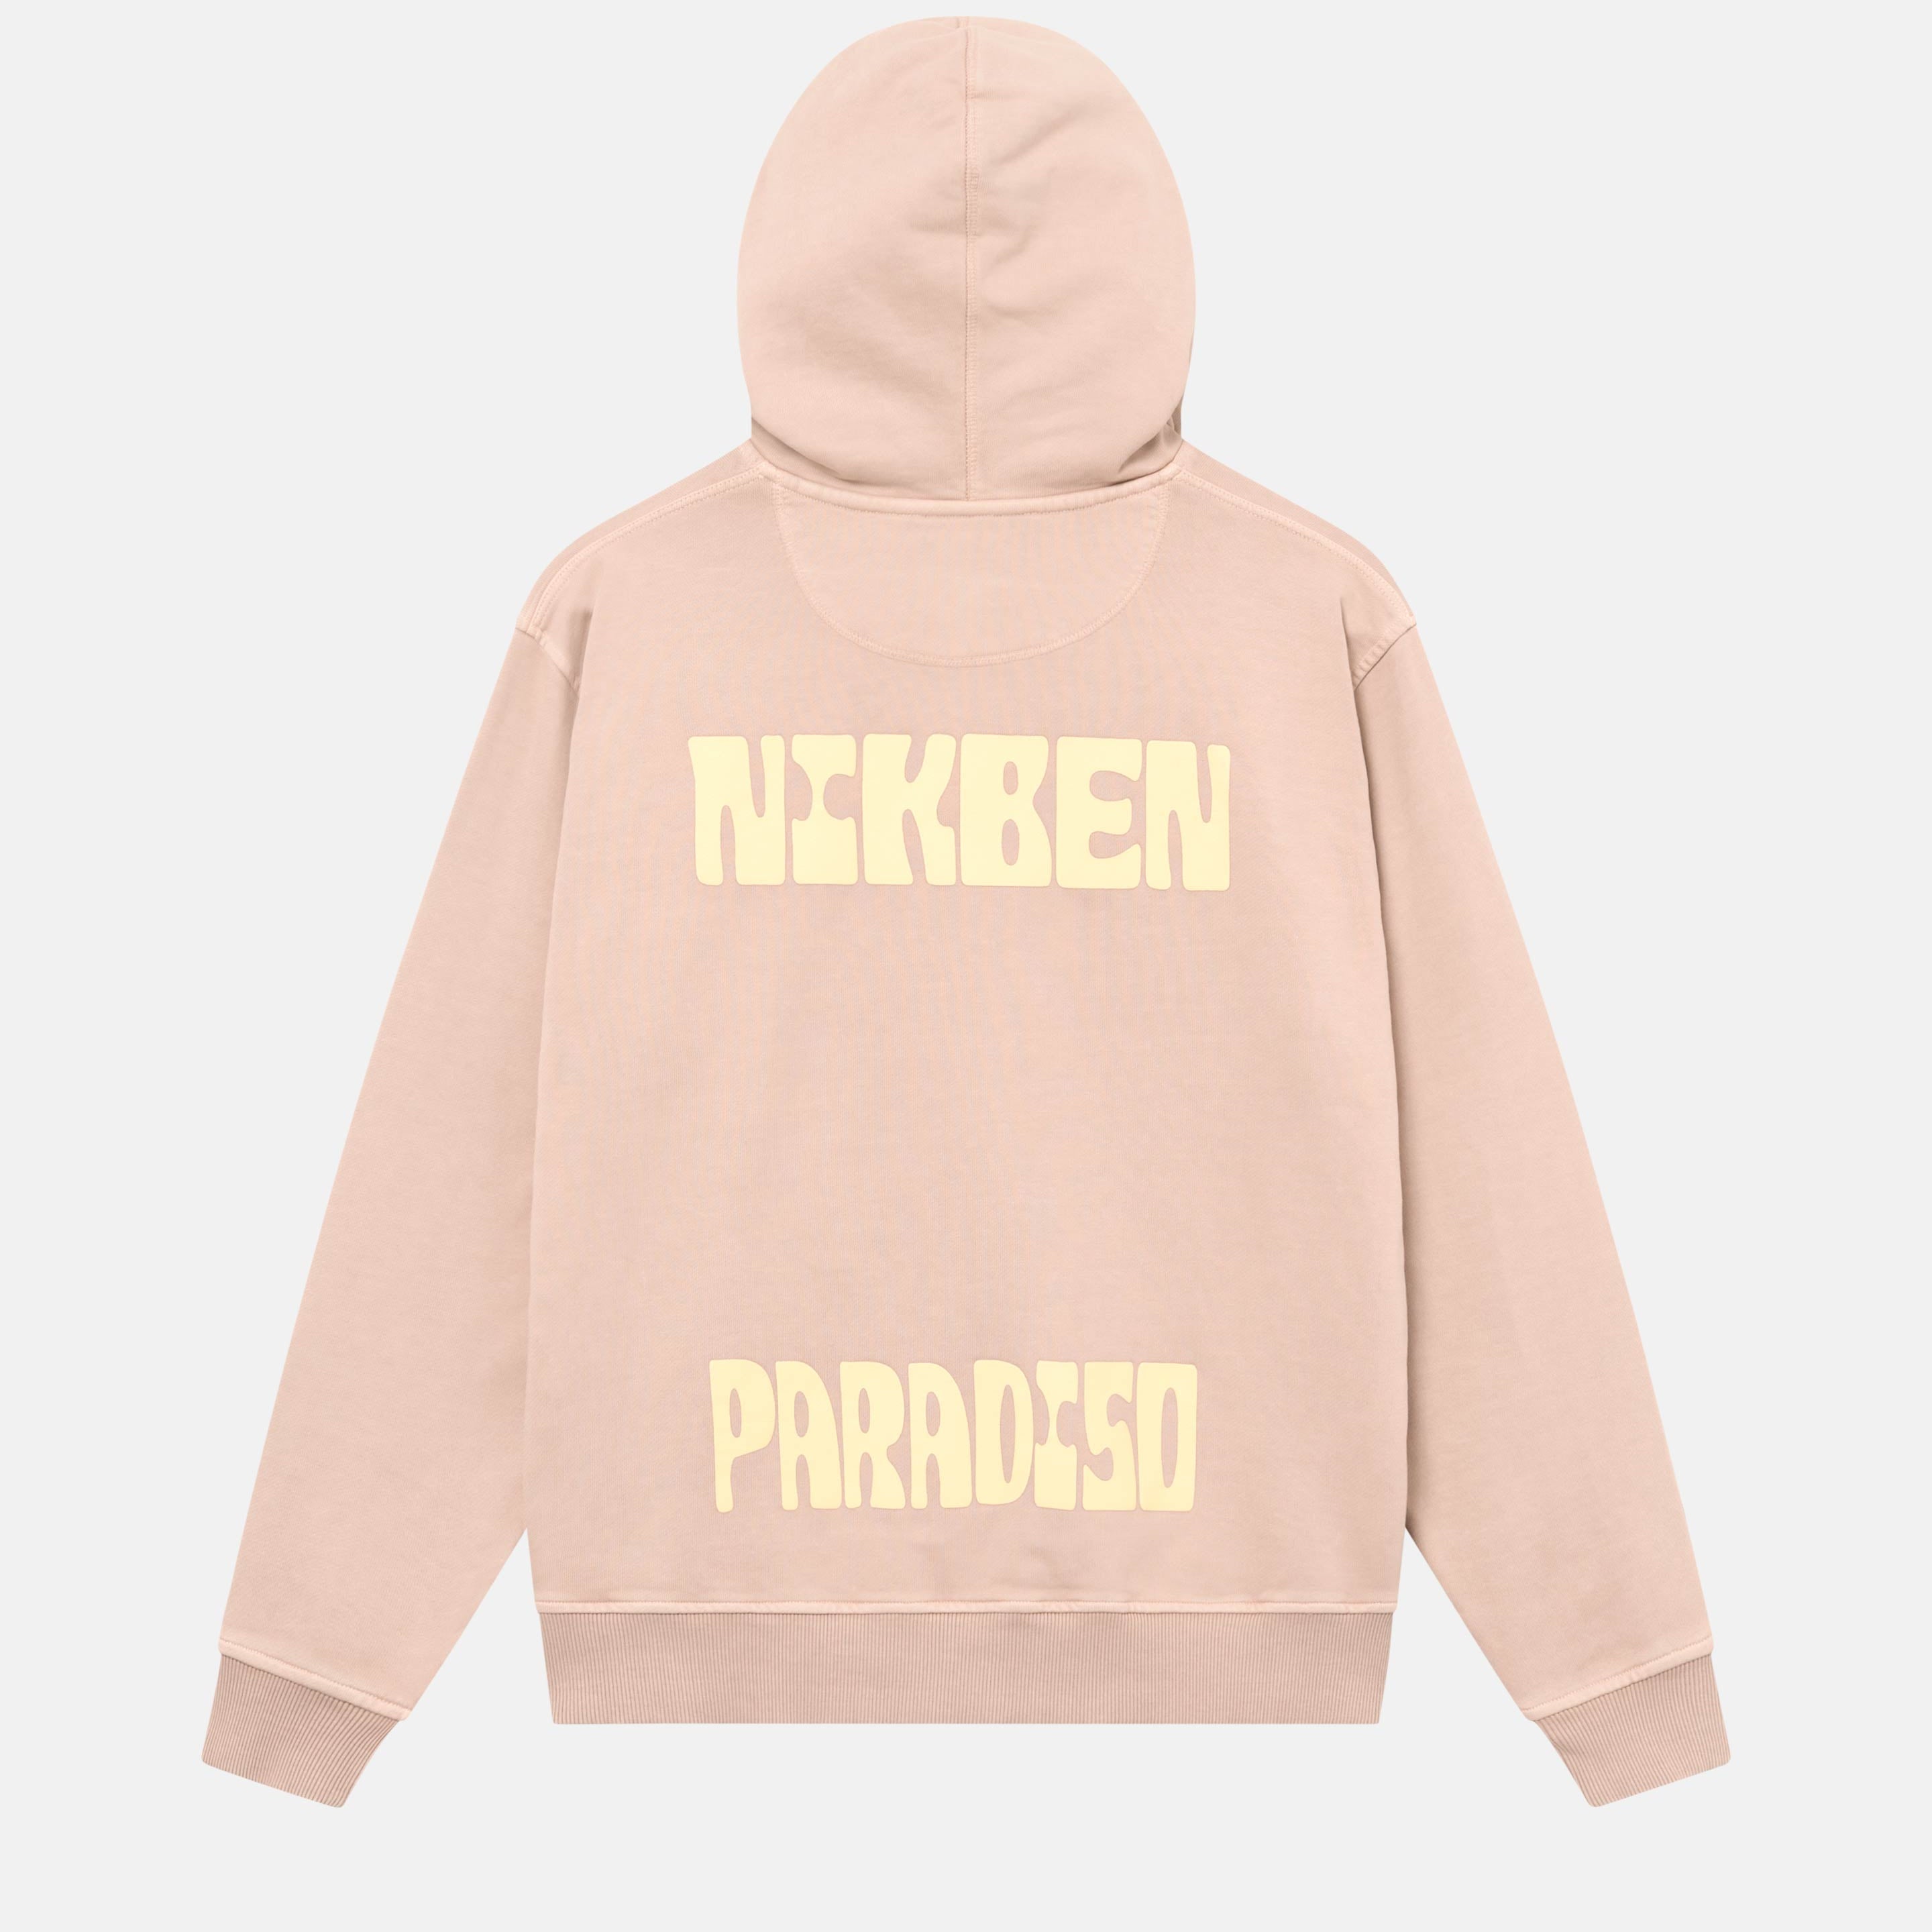 Brown hoodie with a large yellow "Nikben Paradiso" text print on its back